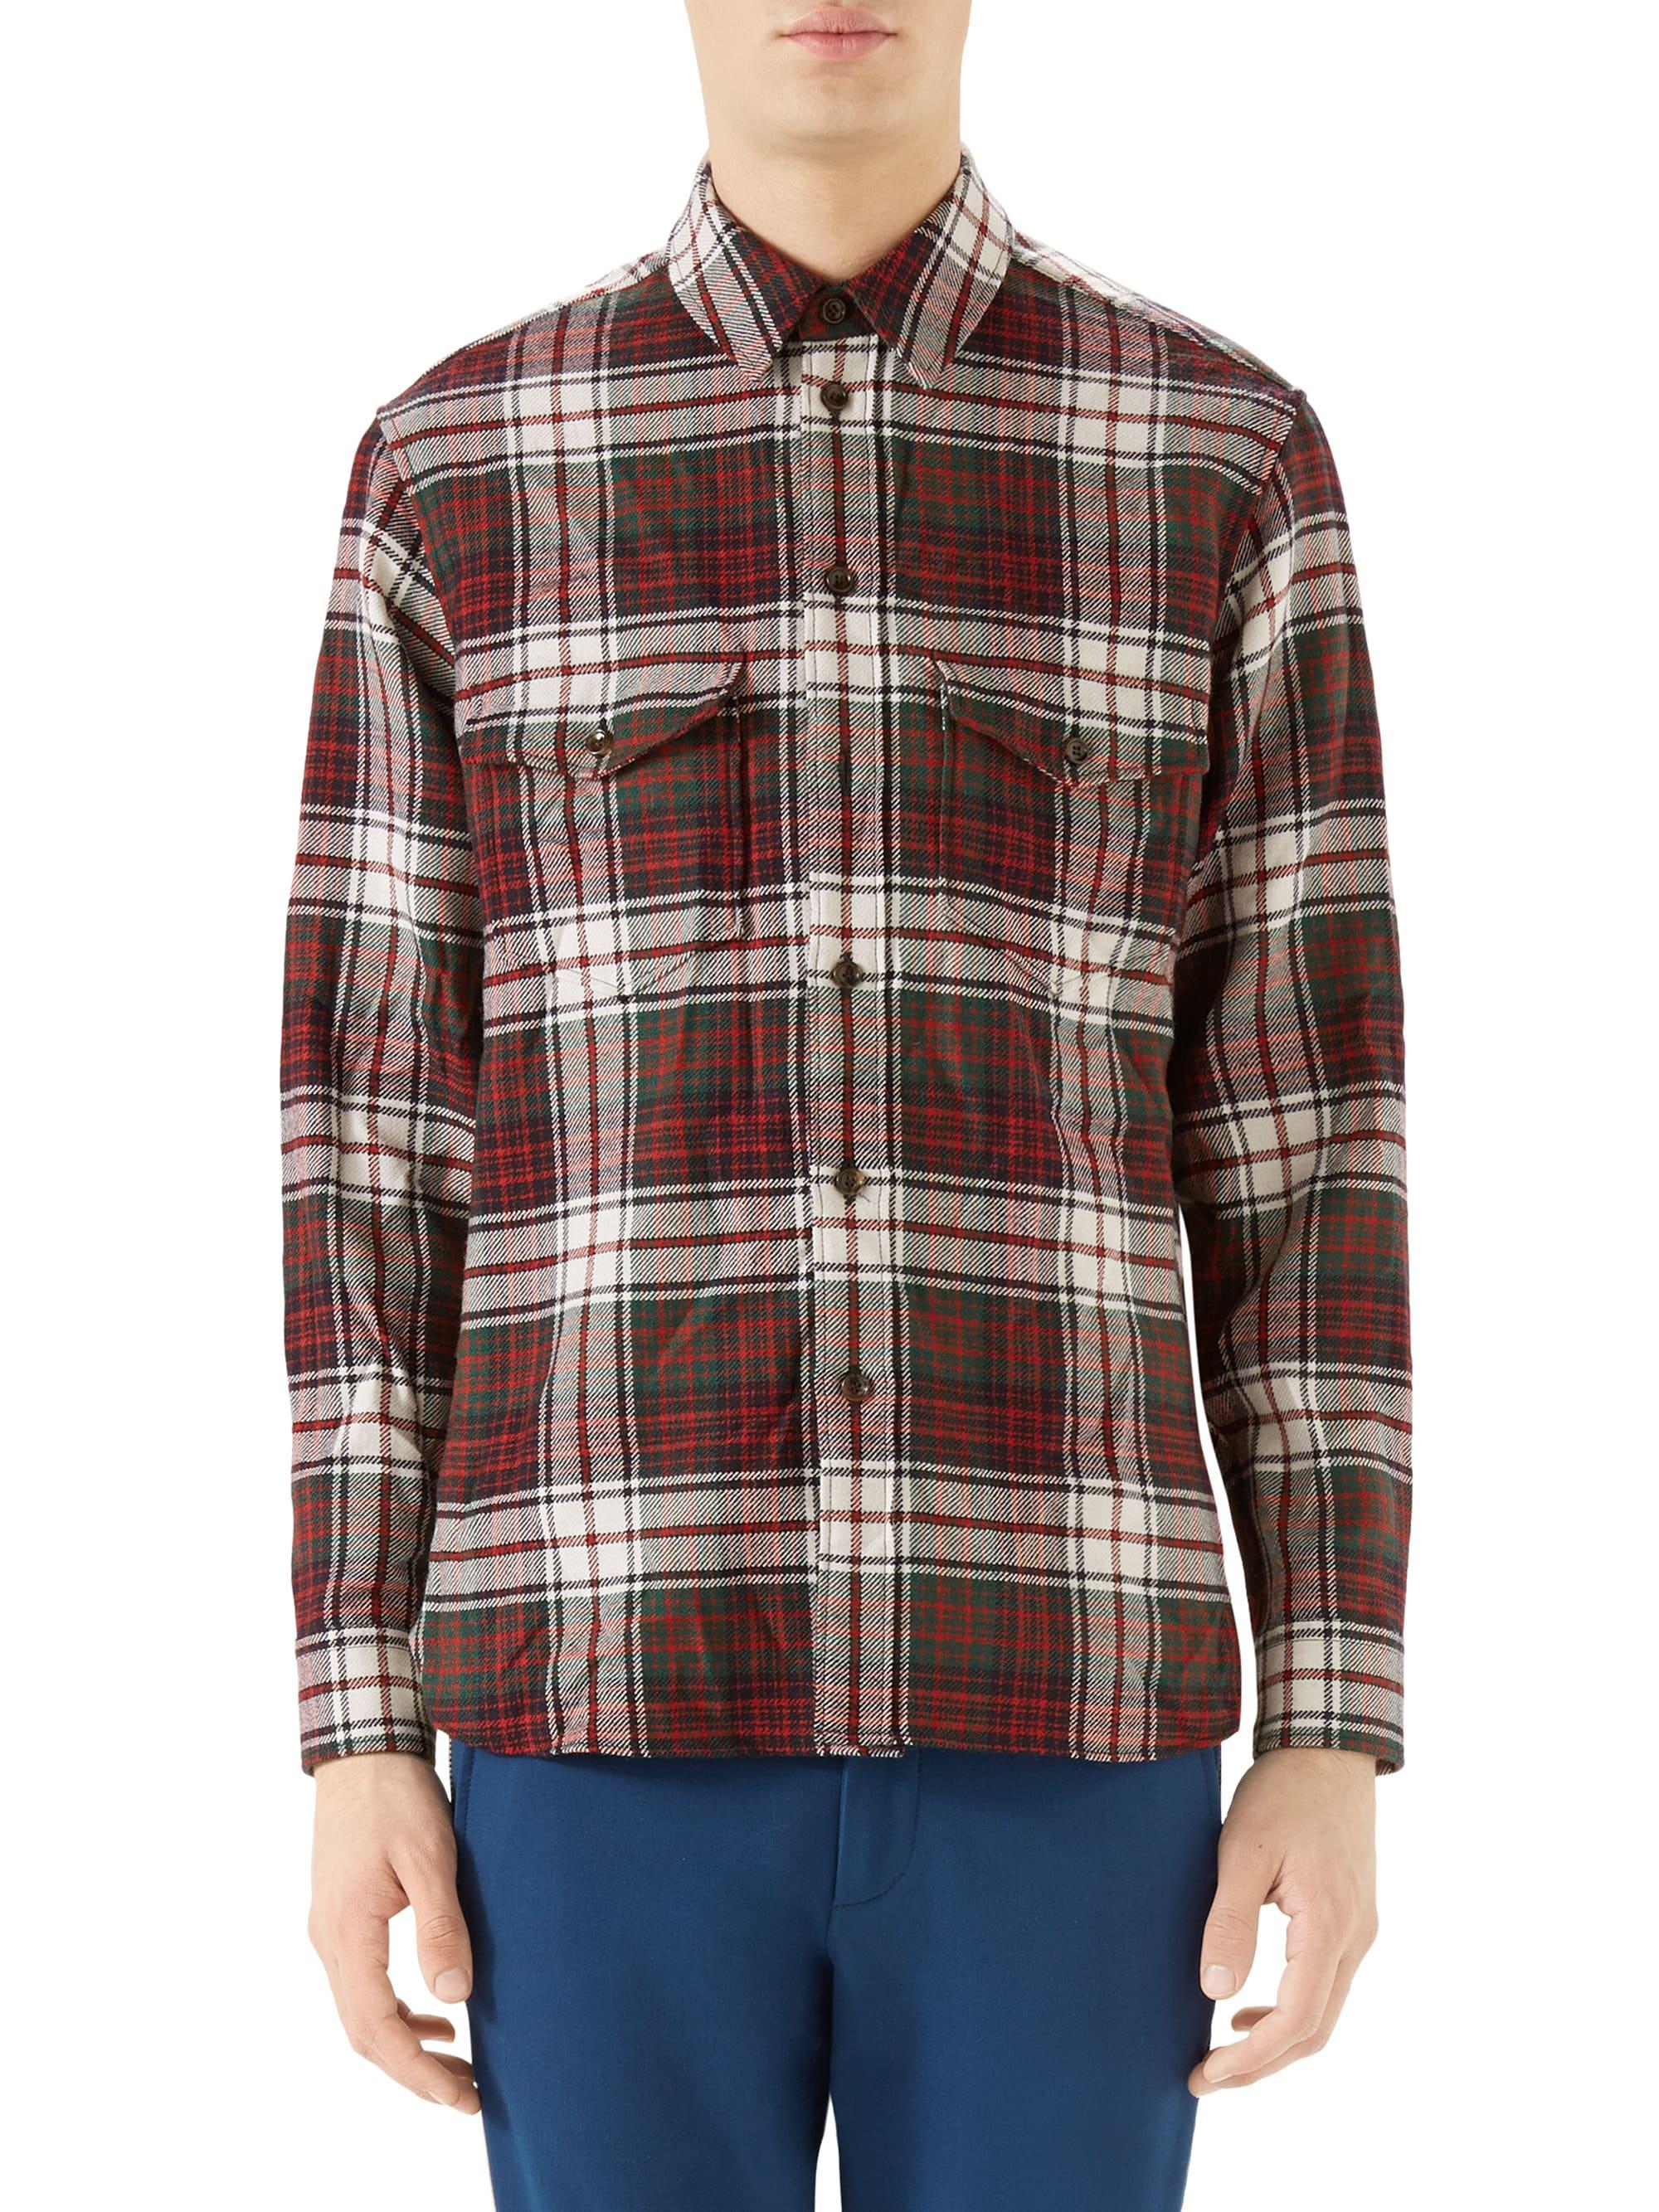 Gucci Men&#39;s Embroidered Tartan Plaid Shirt - White Red Green for Men - Lyst